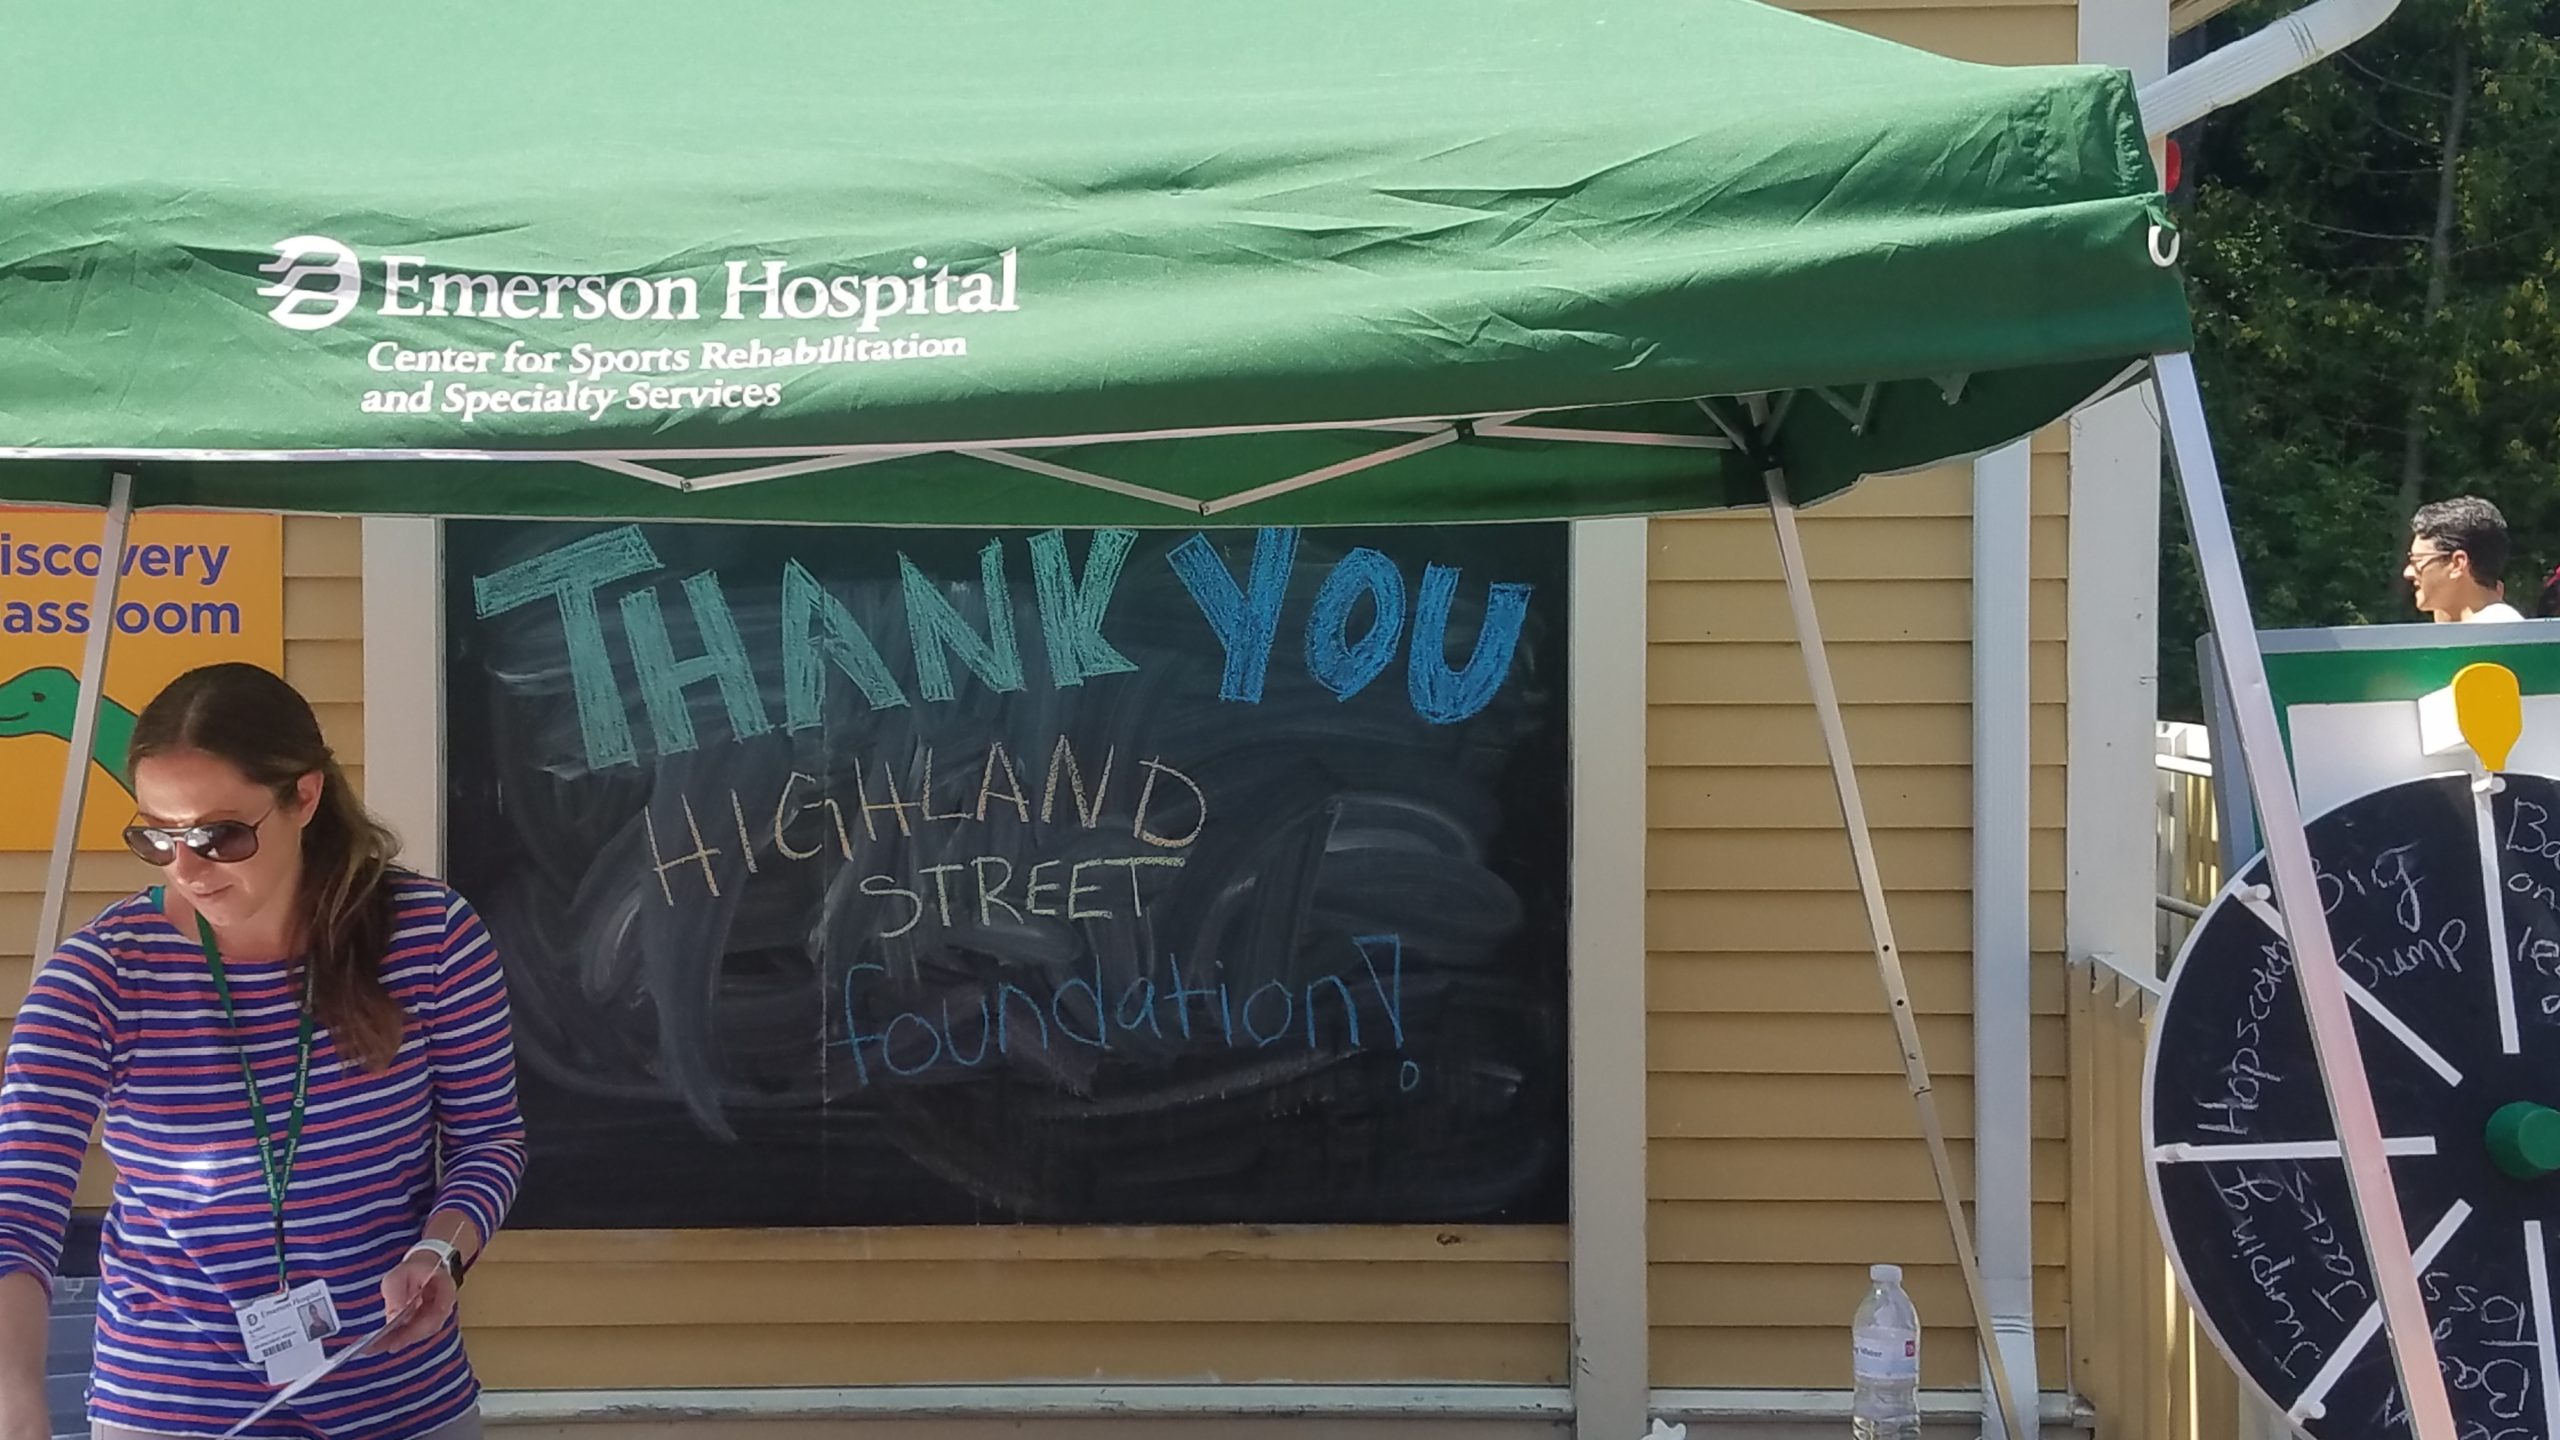 Highland Street Foundation announces 750,000 in grants to help